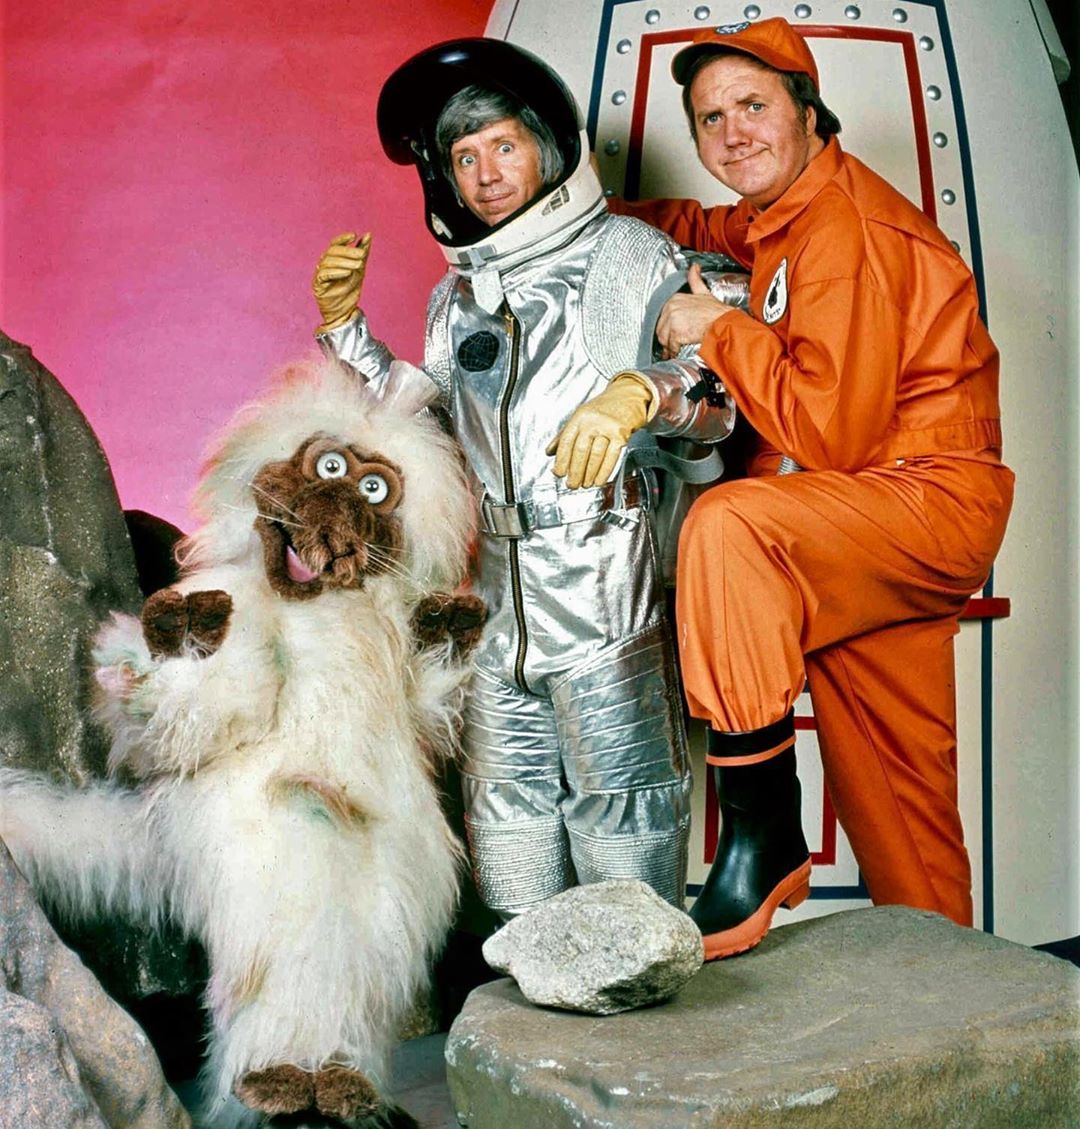 4 Likes, 0 Comments - Melissa (@meliscentsvintage) on Instagram: “FAR OUT SPACE NUTS was another Sid & Marty Krofft kid’s TV show that ran for only one season from…”